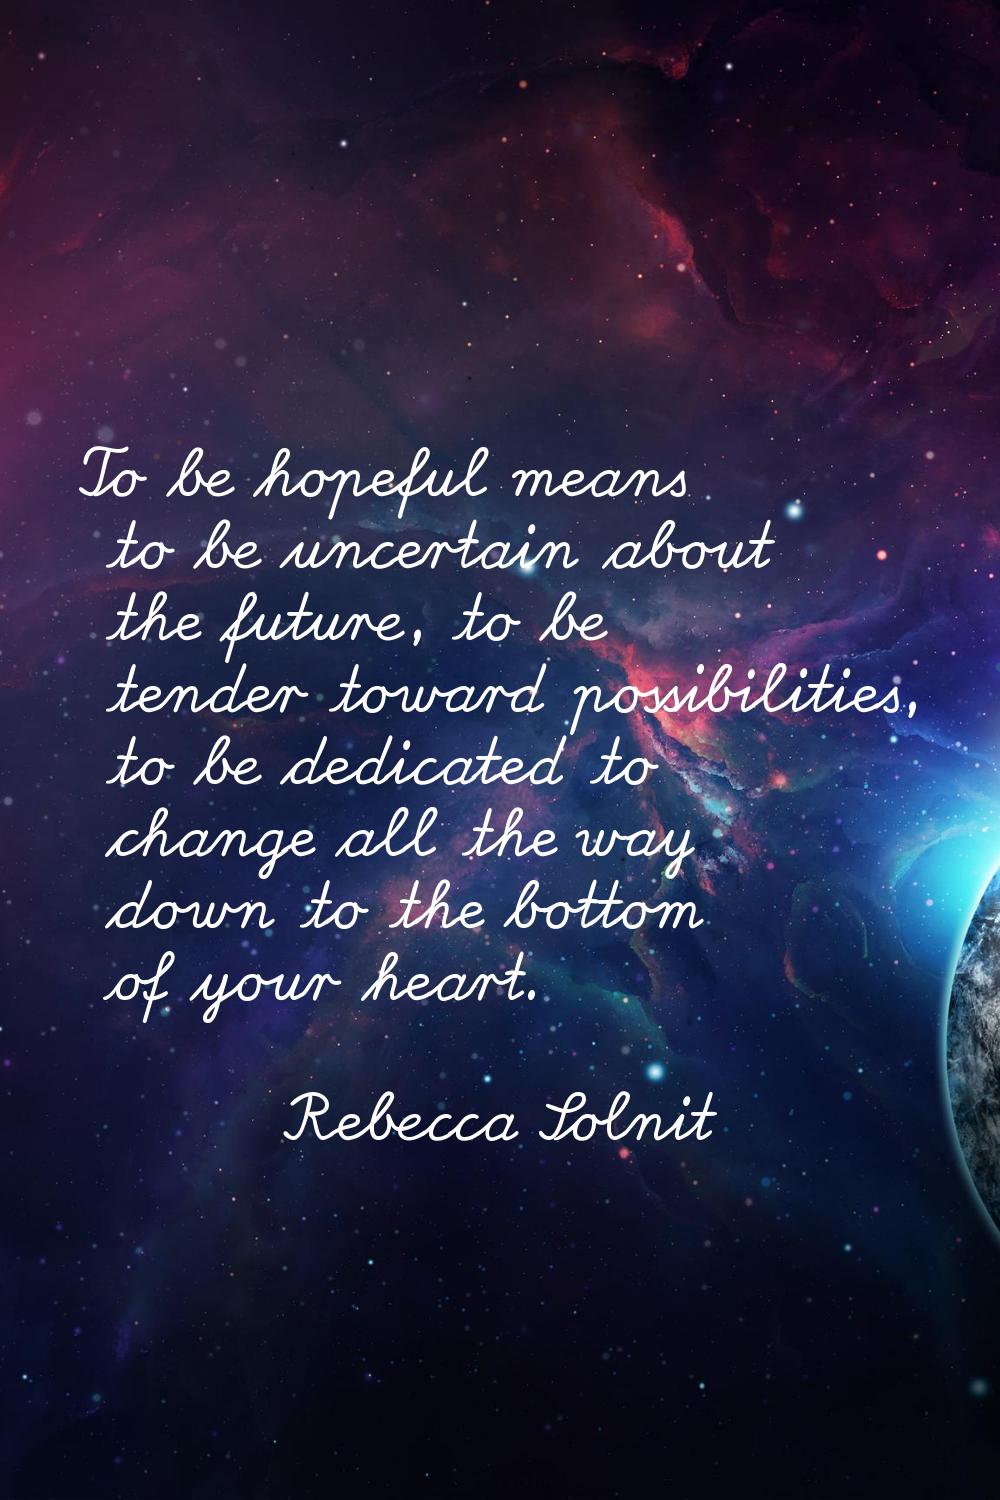 To be hopeful means to be uncertain about the future, to be tender toward possibilities, to be dedi